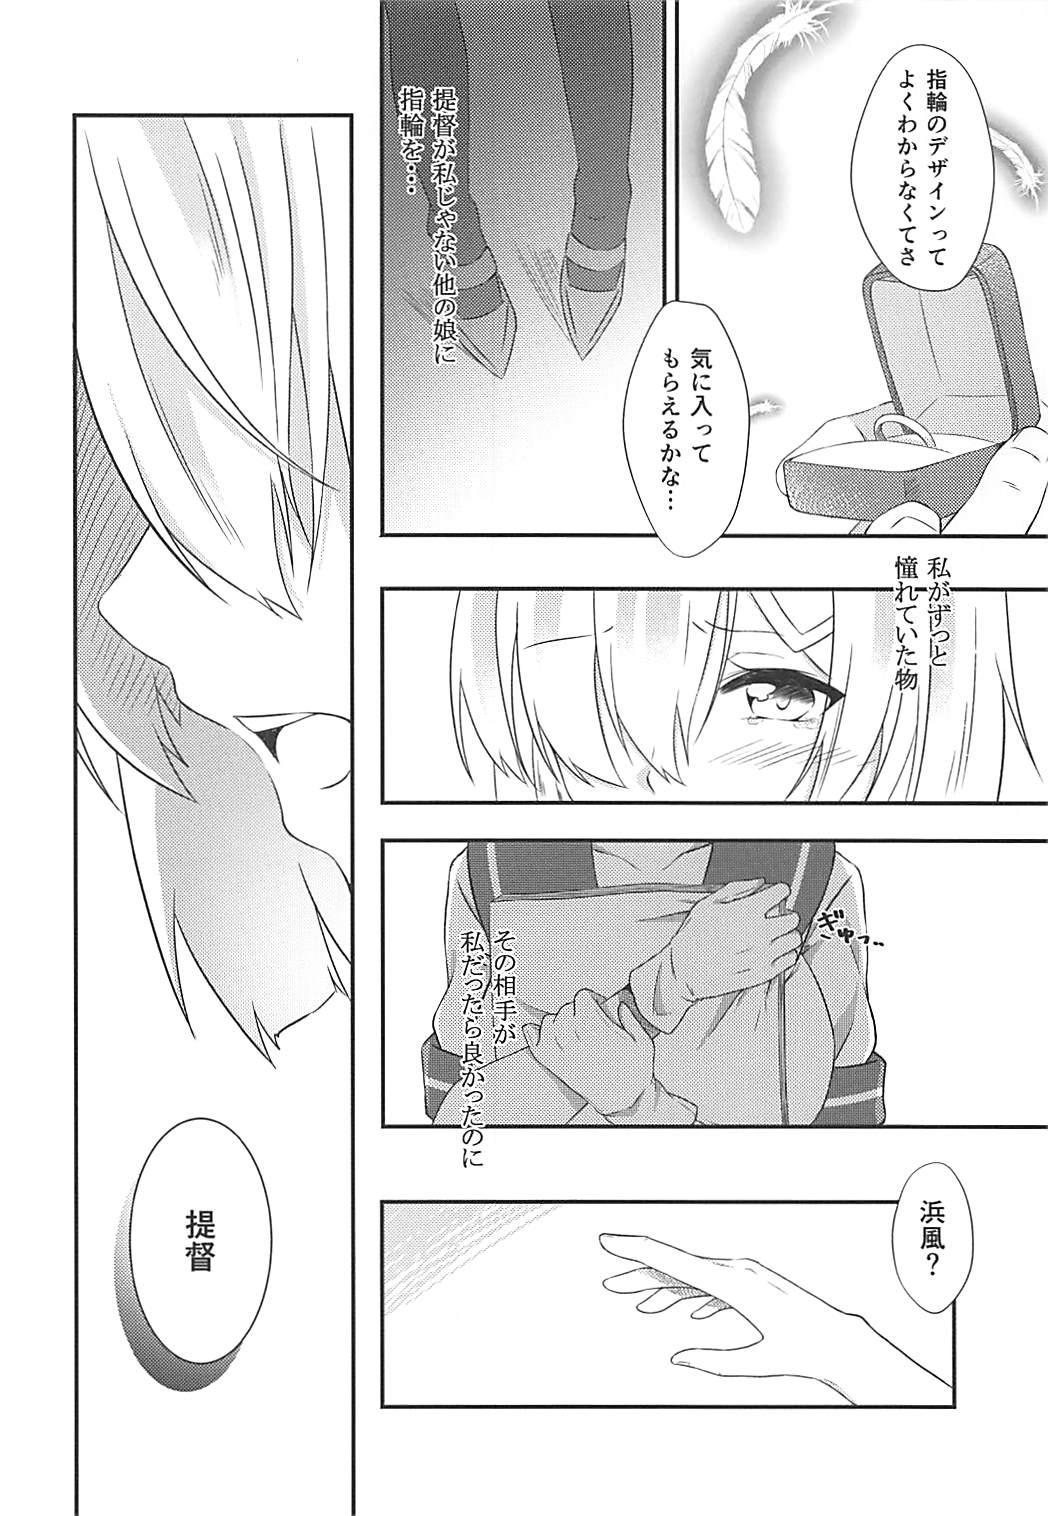 Girlfriend a happy ending - Kantai collection Cunt - Page 5